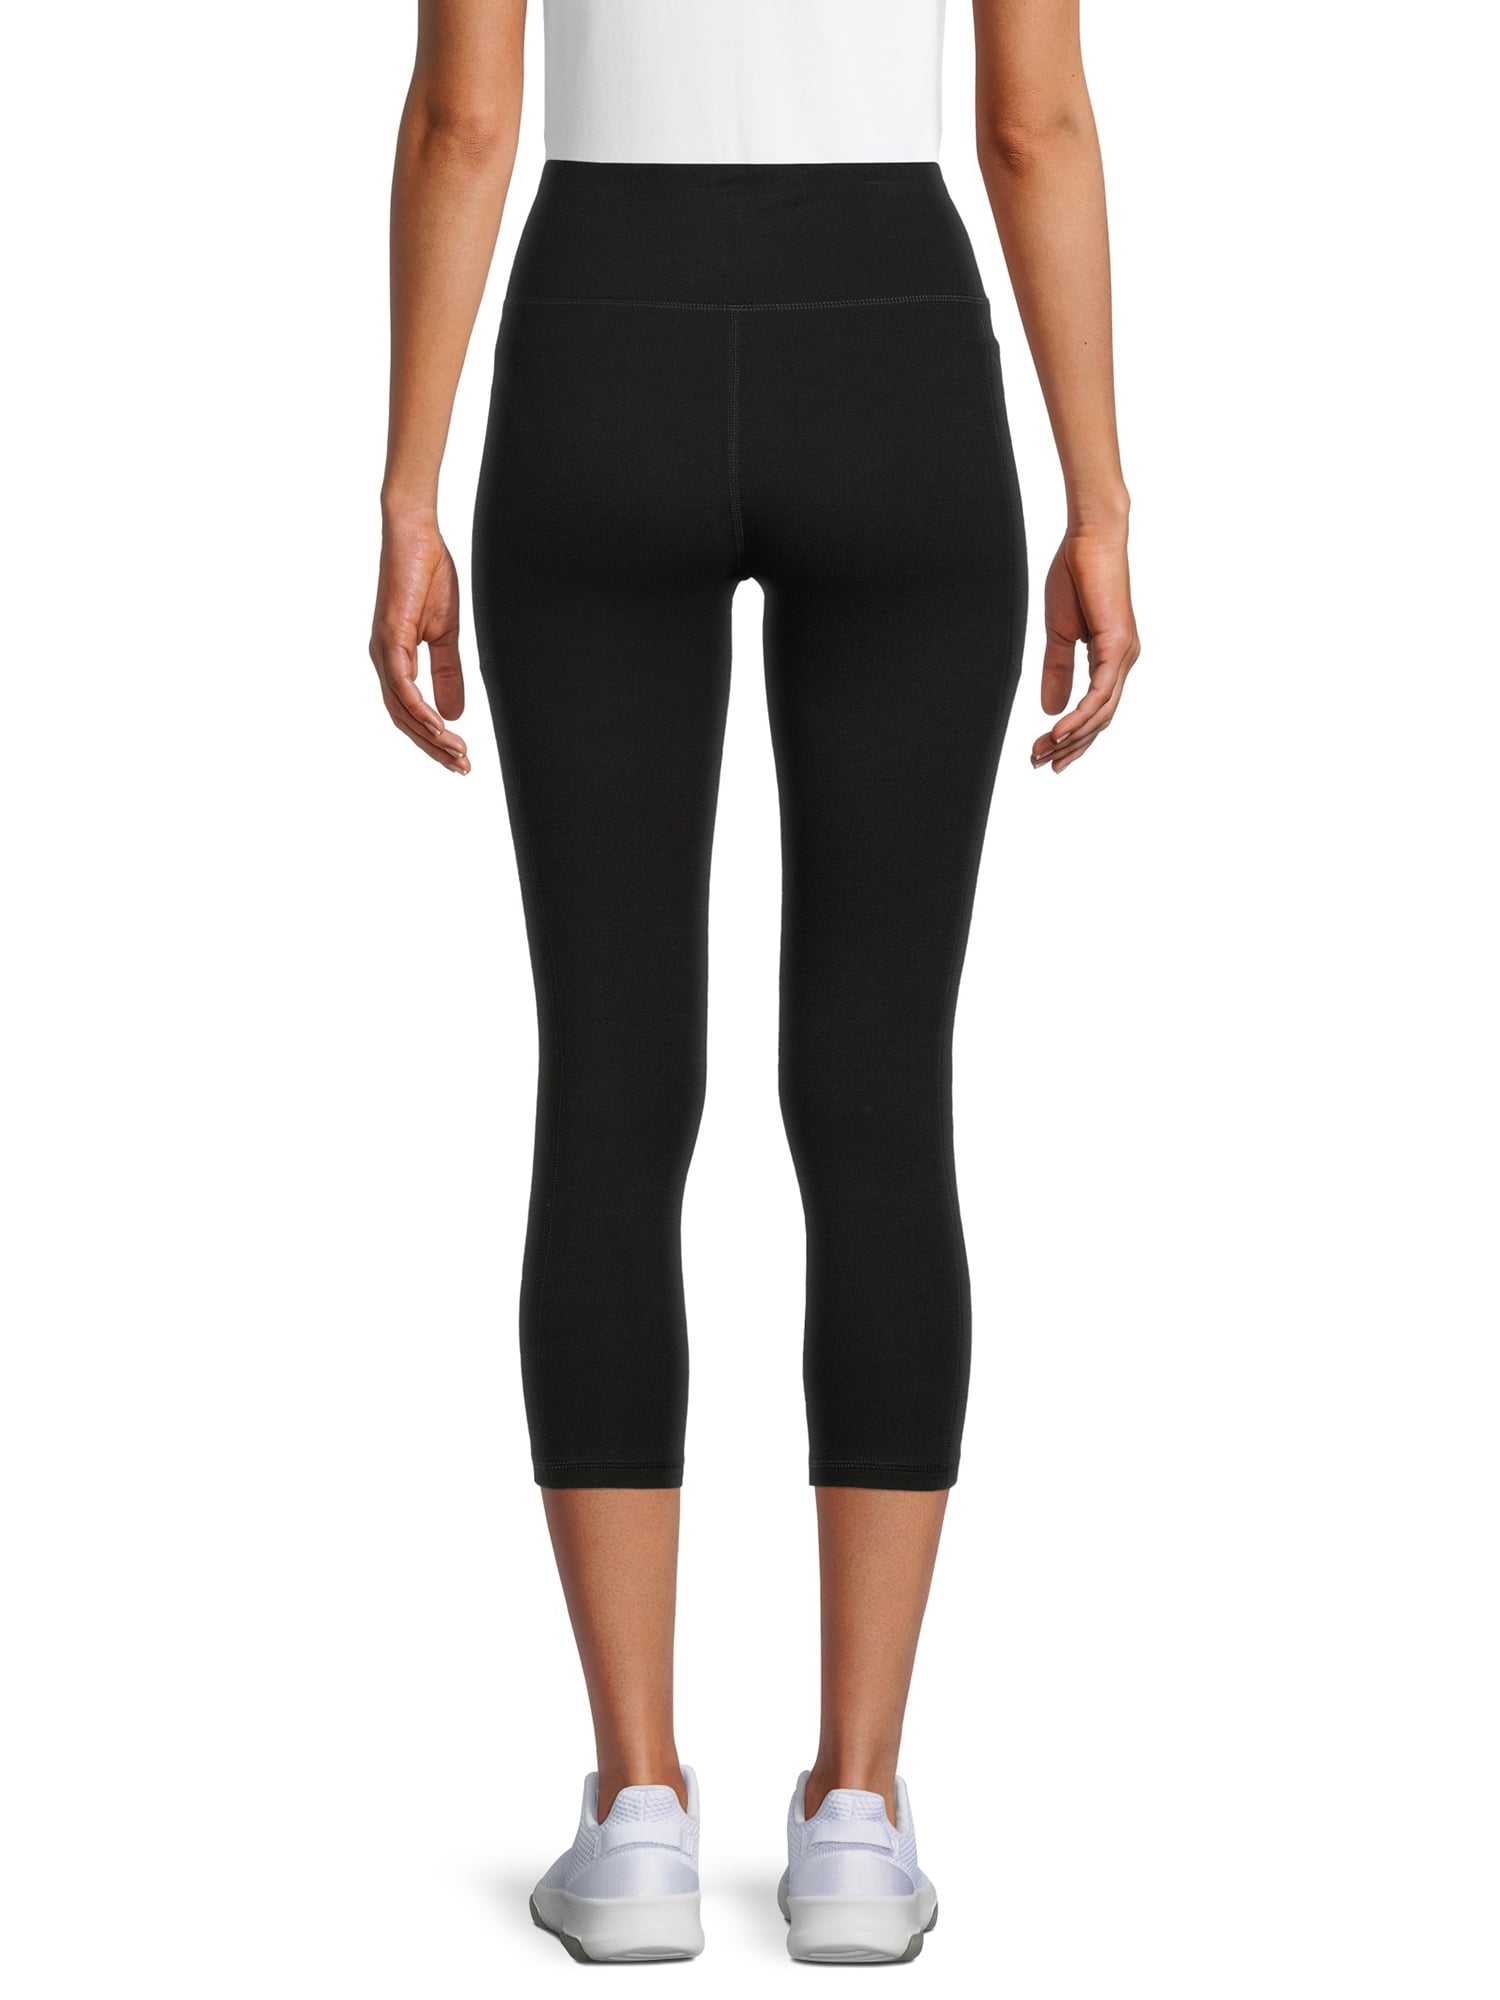 Dropship Jolie HIgh-Waisted Capri Leggings With Hip Pockets to Sell Online  at a Lower Price | Doba